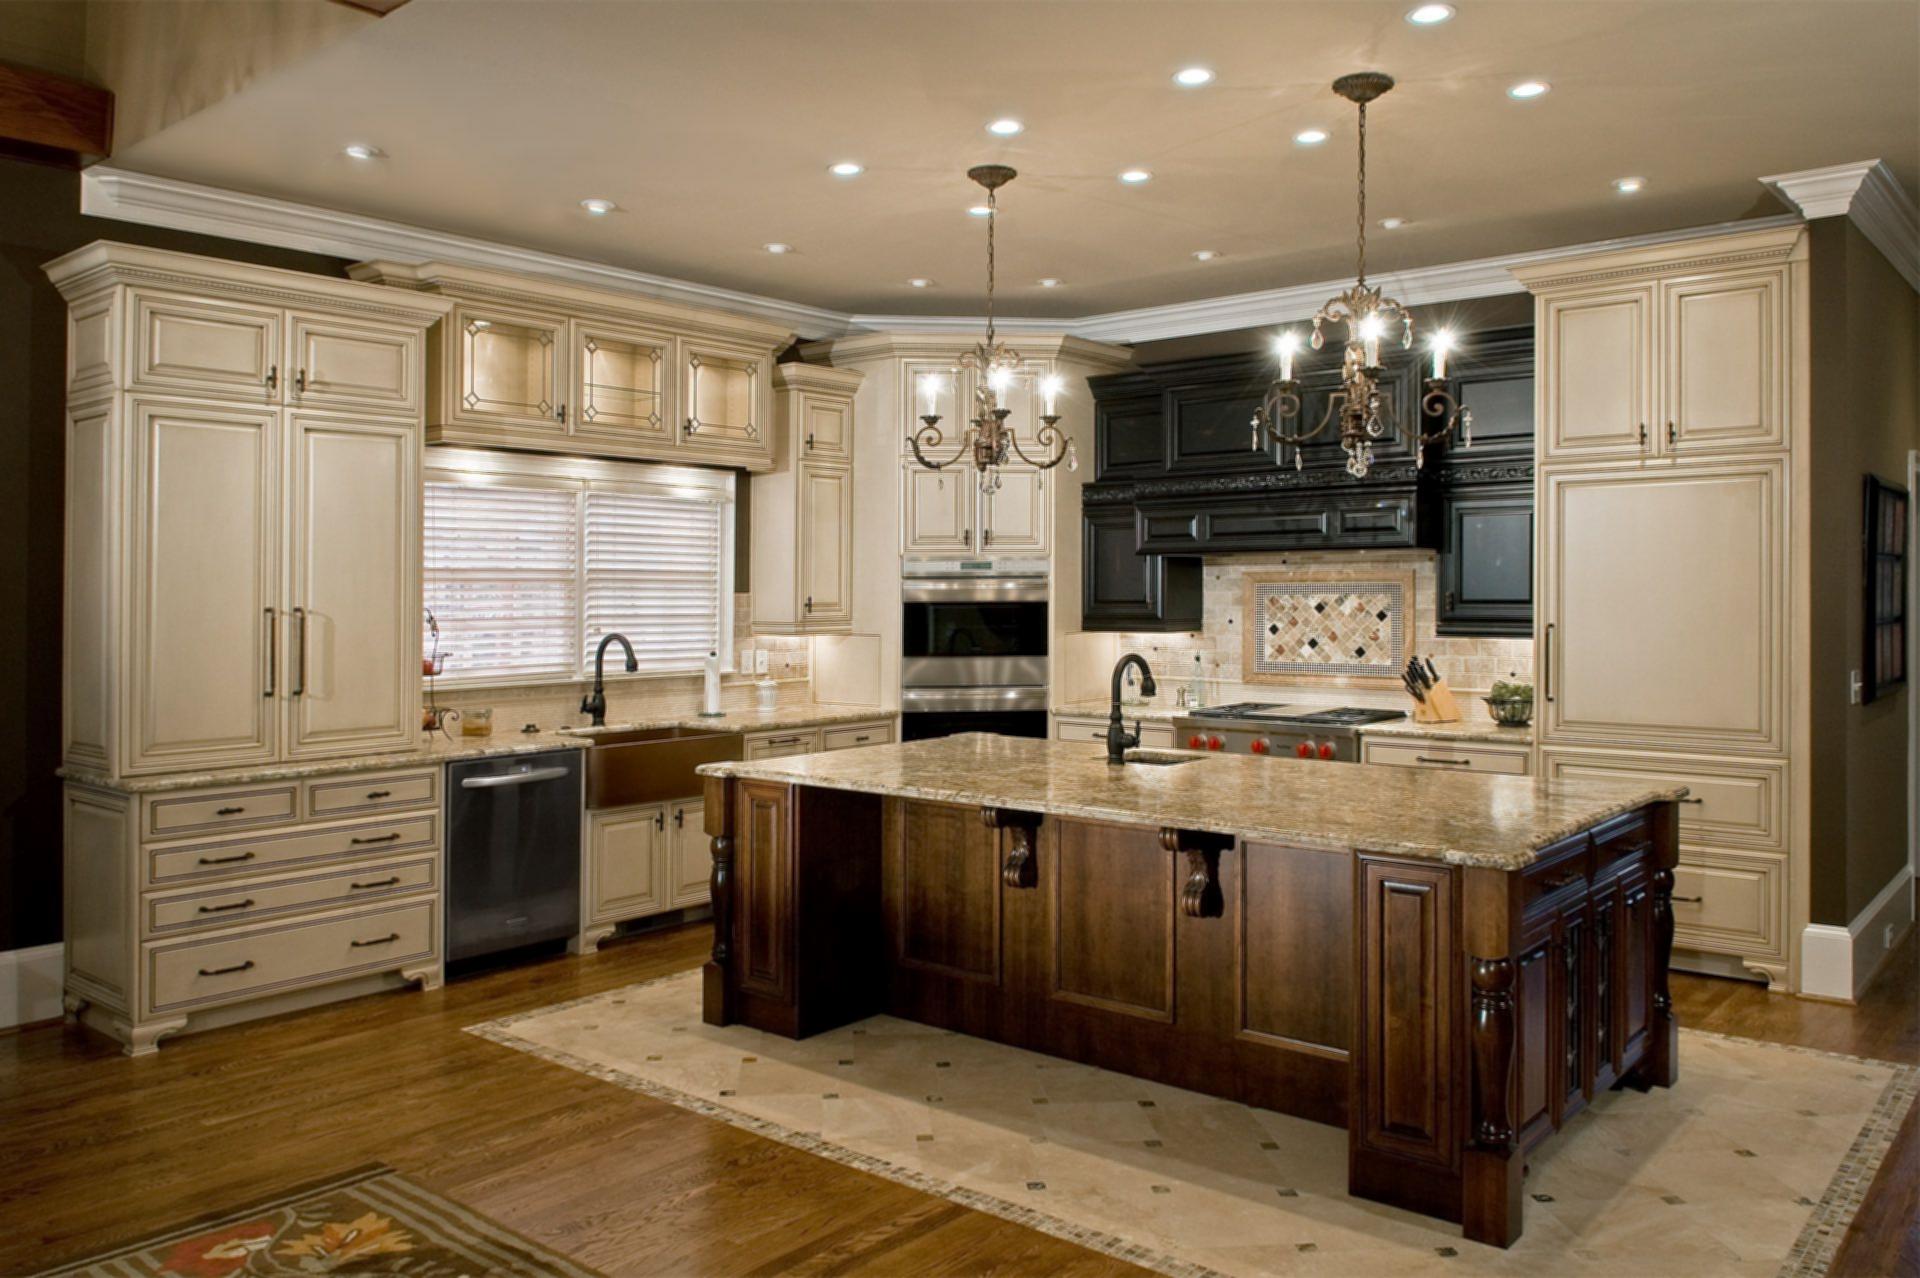 vanity-kitchen-renovation-ideas-of-with-chandelier-in-pictures-superbropriate-l-shape-164